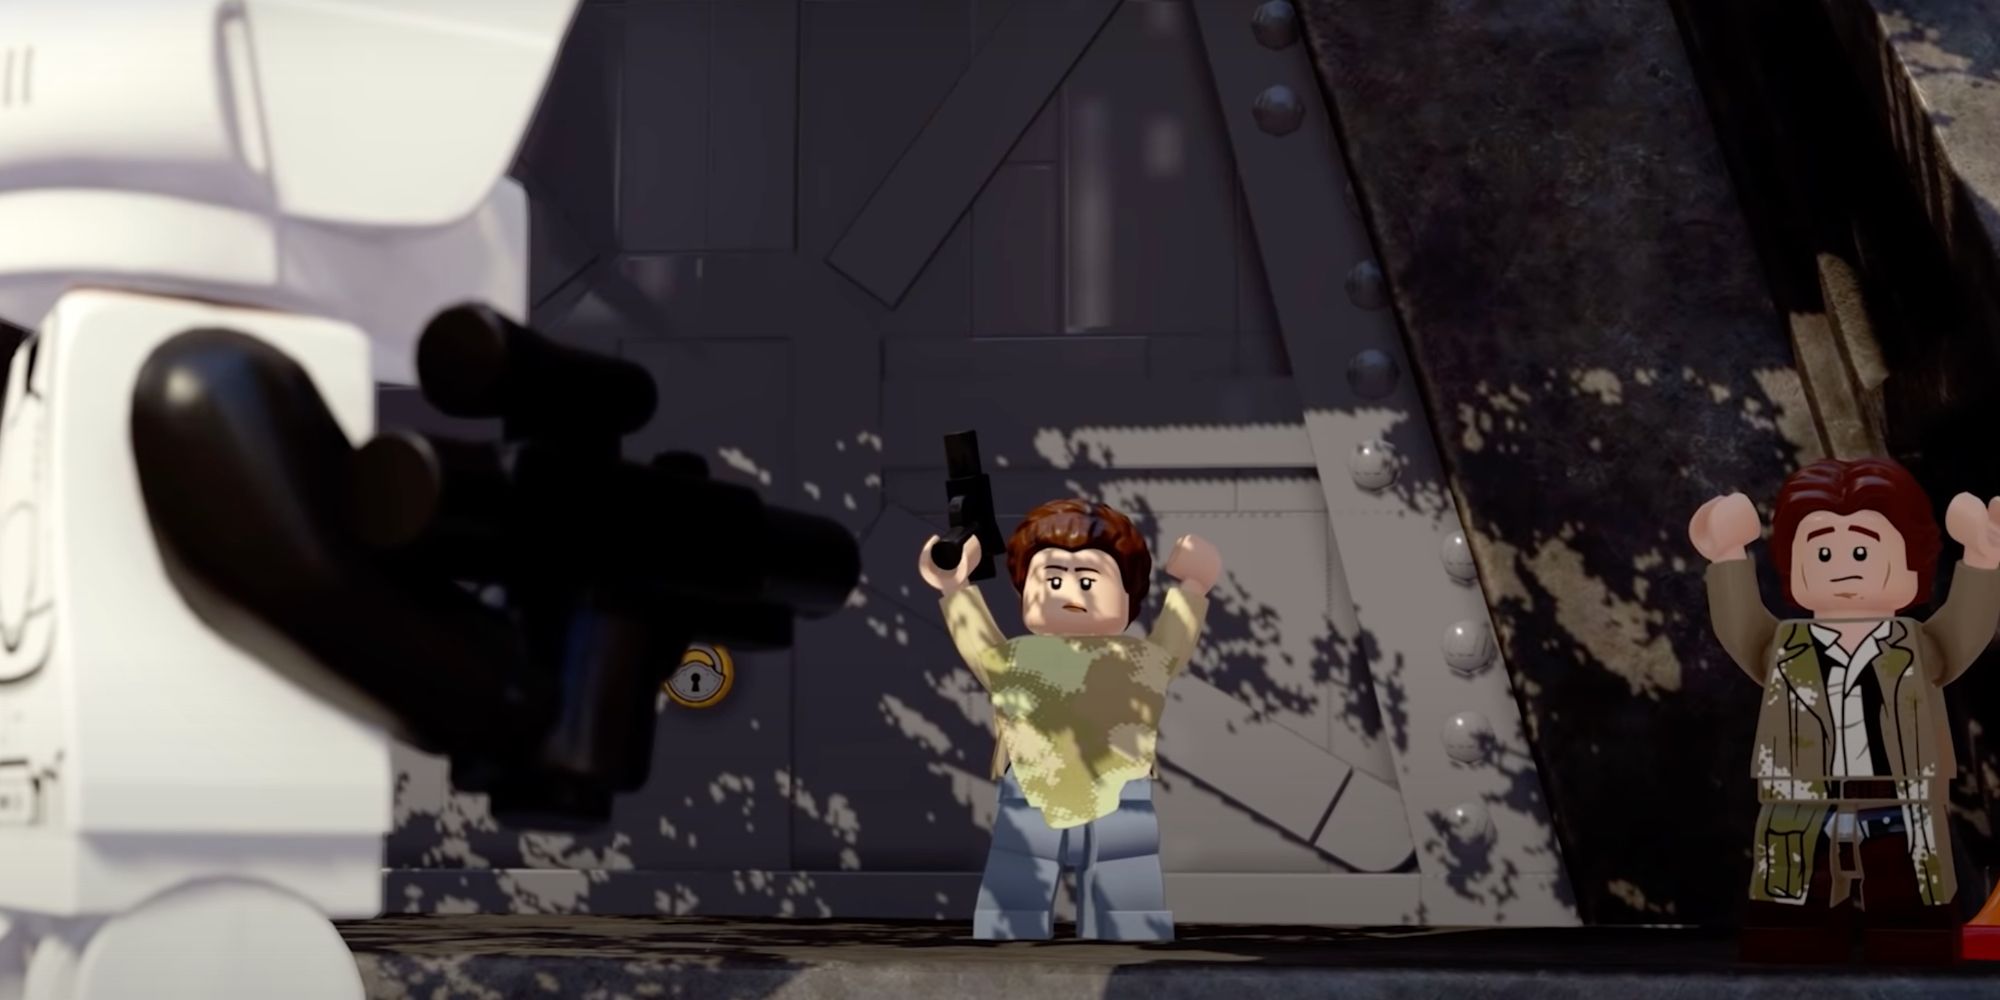 More levels, even just free roam environments, would be a good addition to LEGO Star Wars: The Skywalker Saga as DLC